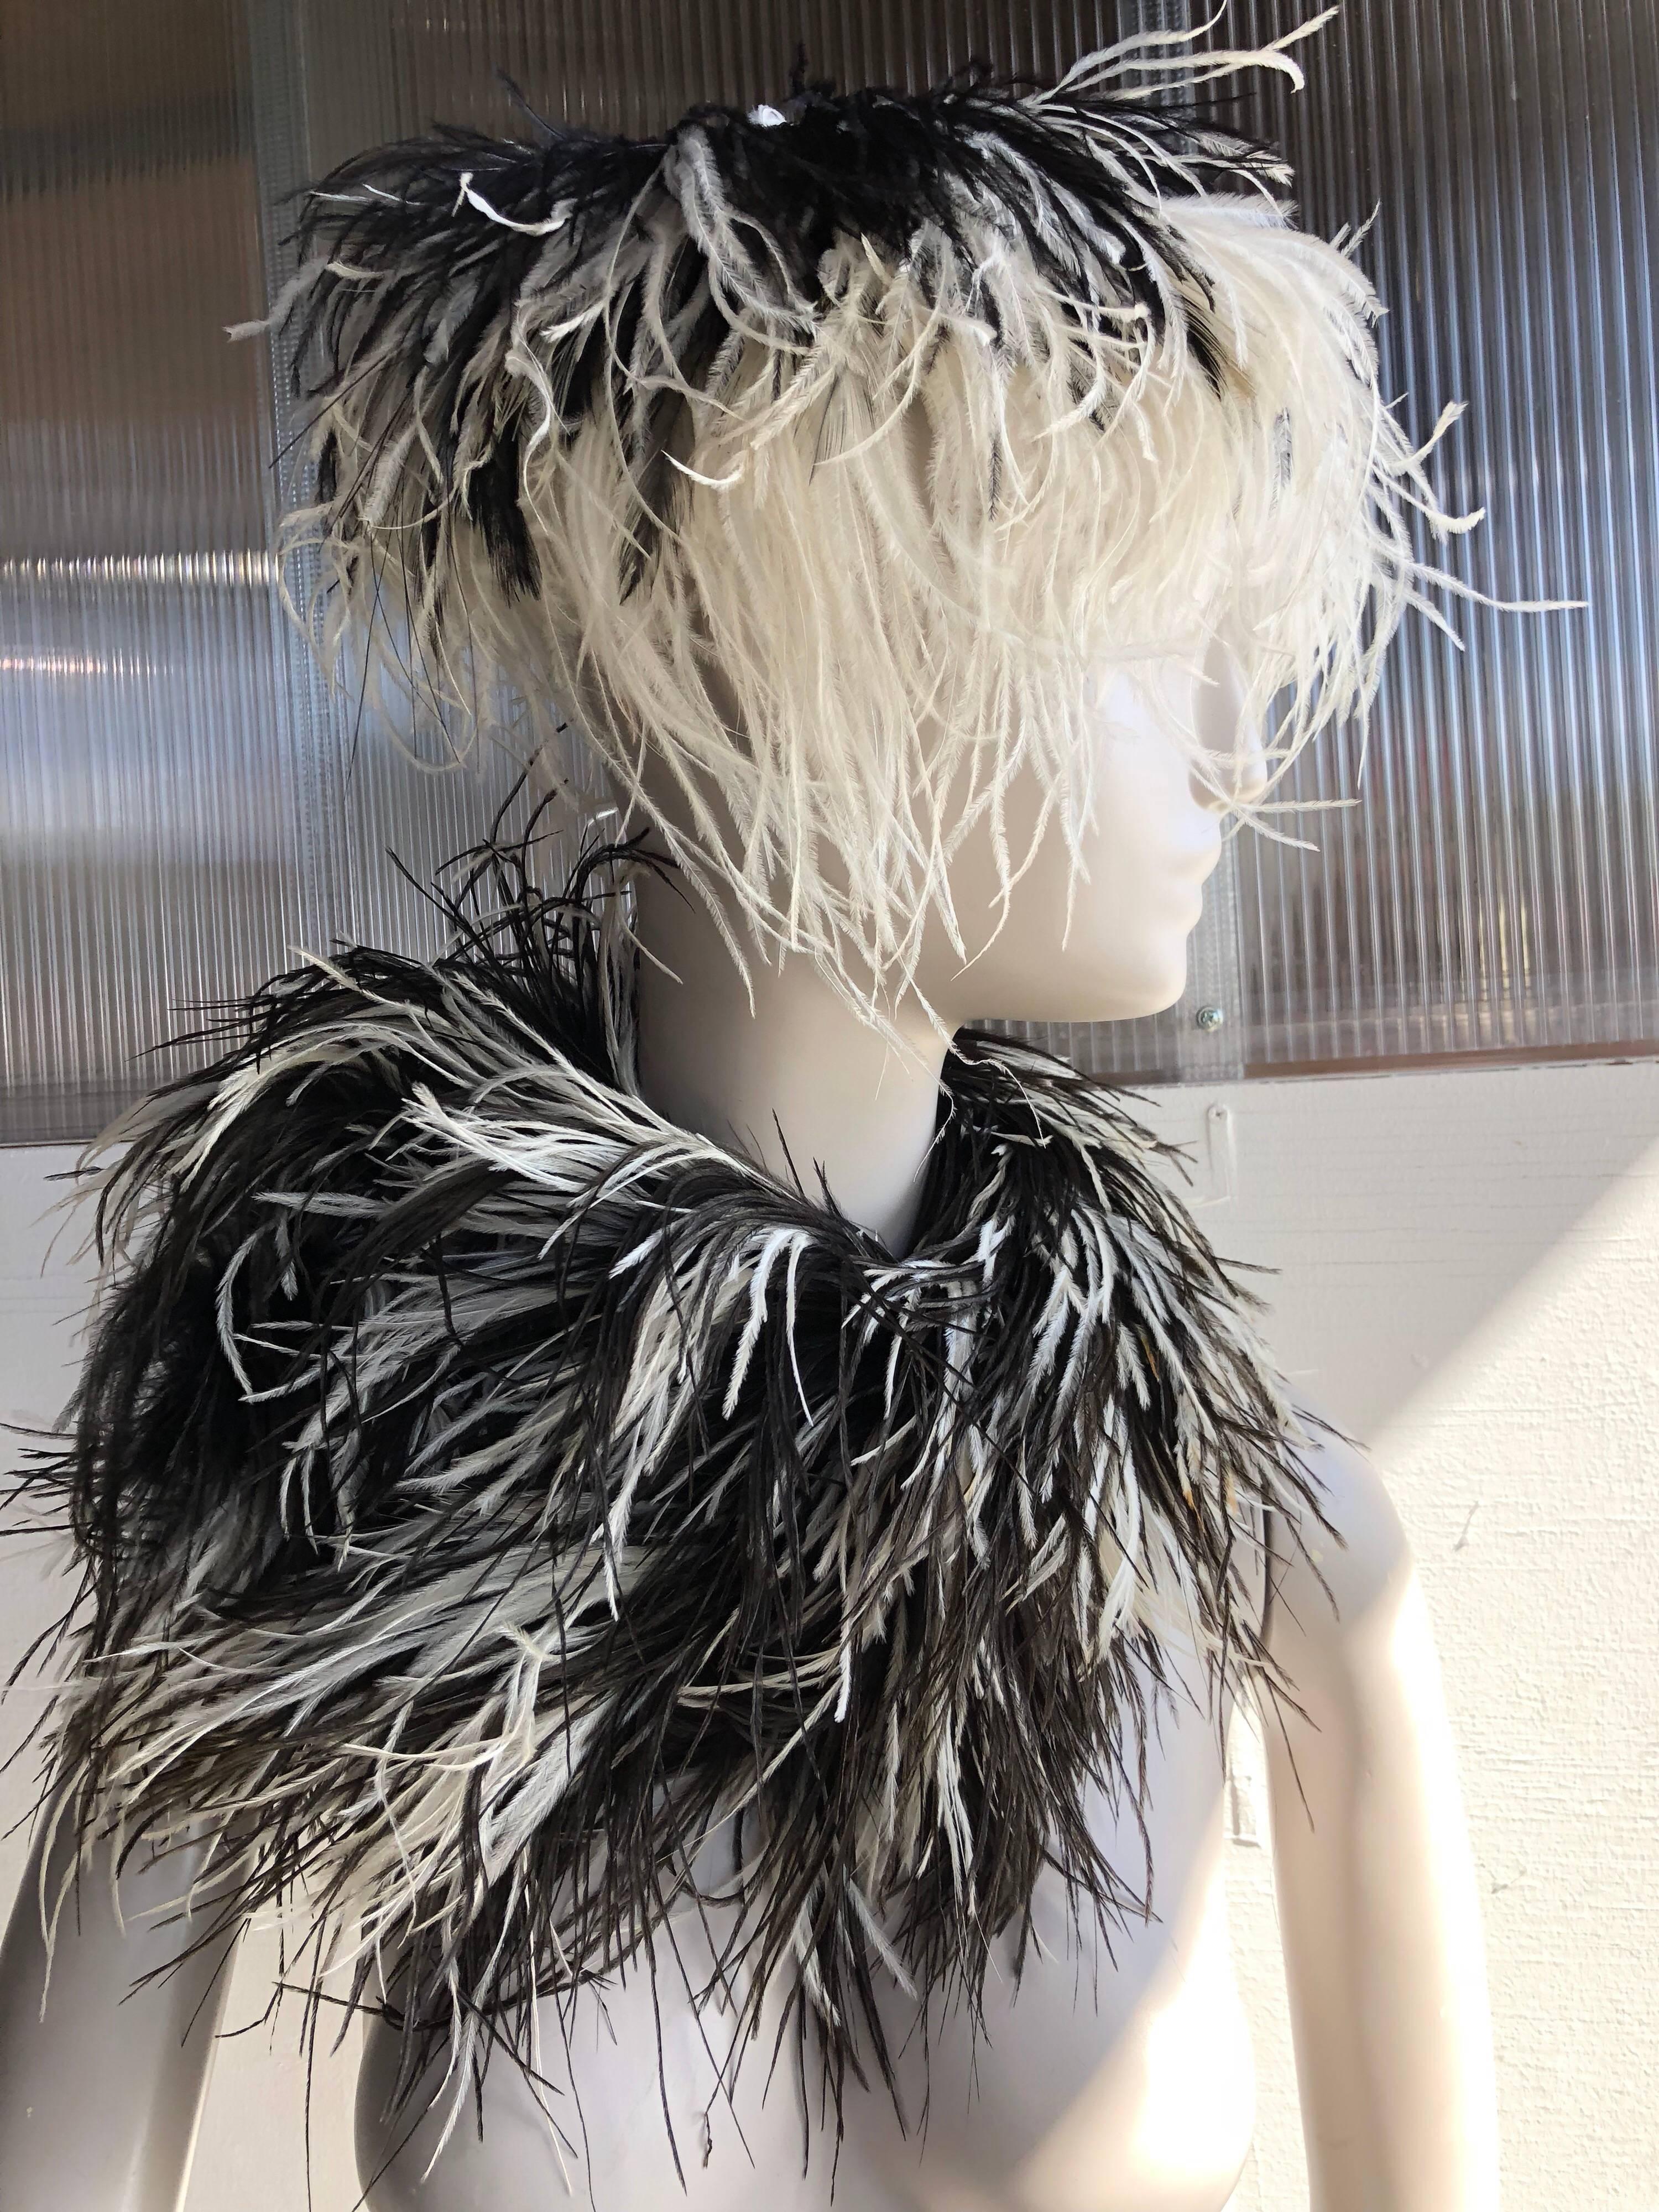 1950s Rare William J. black and white ostrich feather saucer-style hat, with center, top button embellishment.  Sold with a beautiful black and white feather boa that matches, but was not originally a set. William J. is better-known as famed